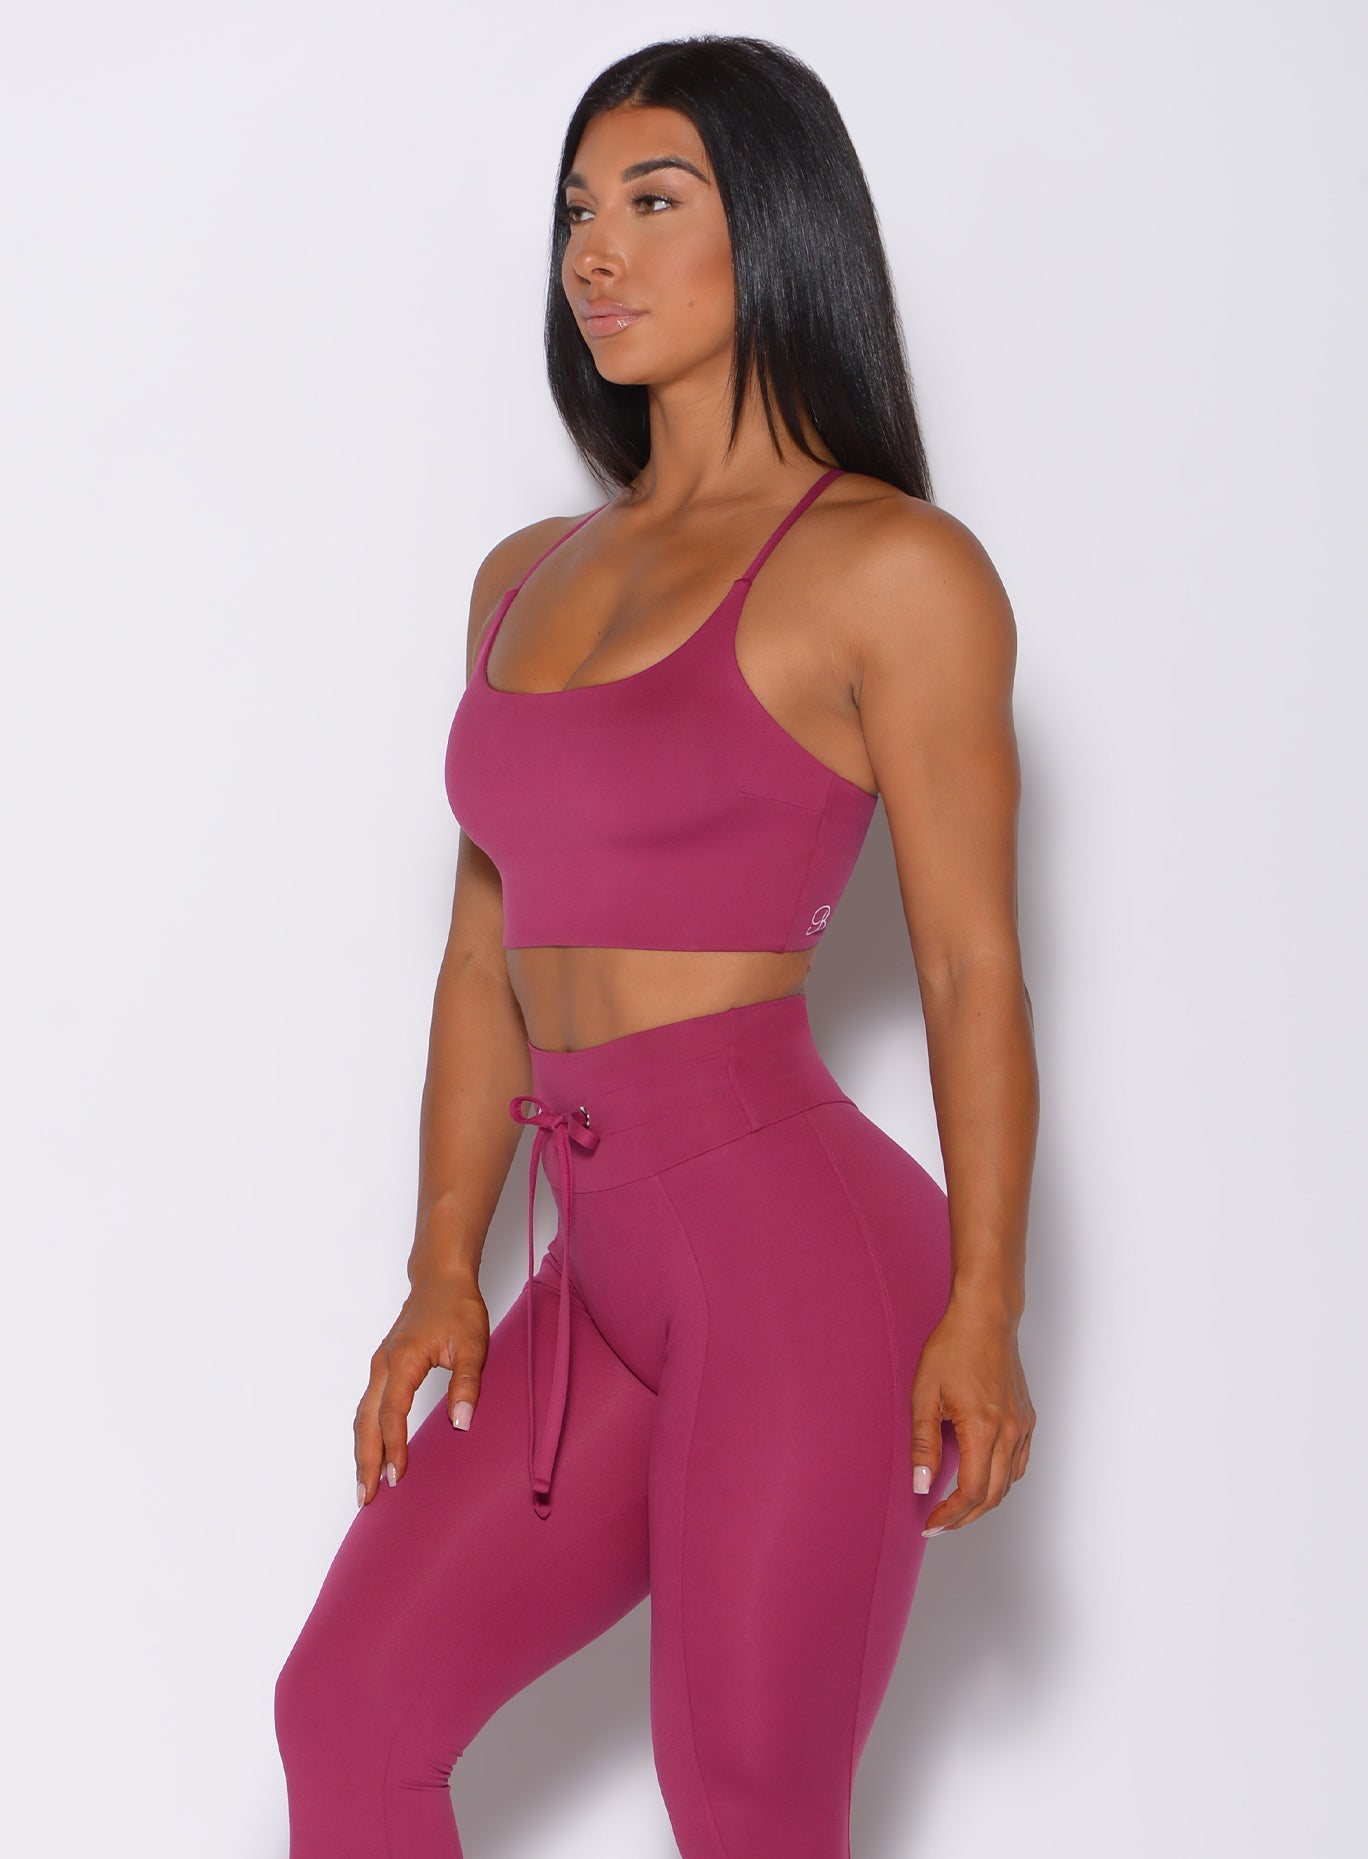 Left side profile view of a model facing forward wearing our cross fit sports bra in berry good color and a matching leggings